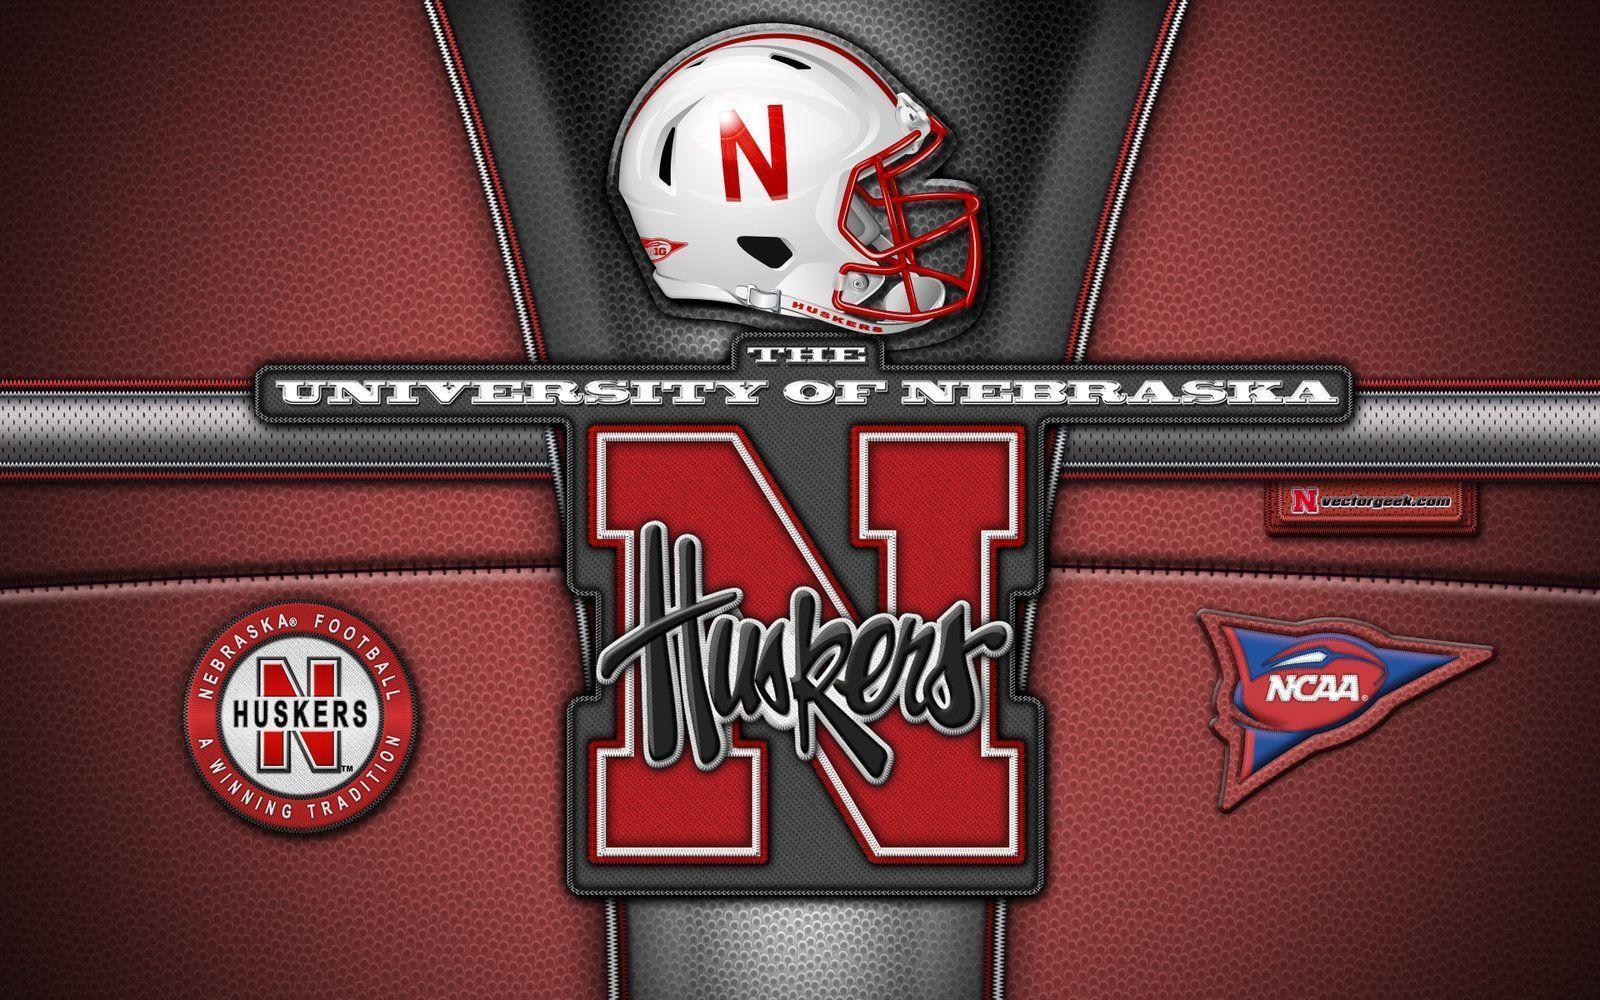 Huskers patch wallpaper (red)